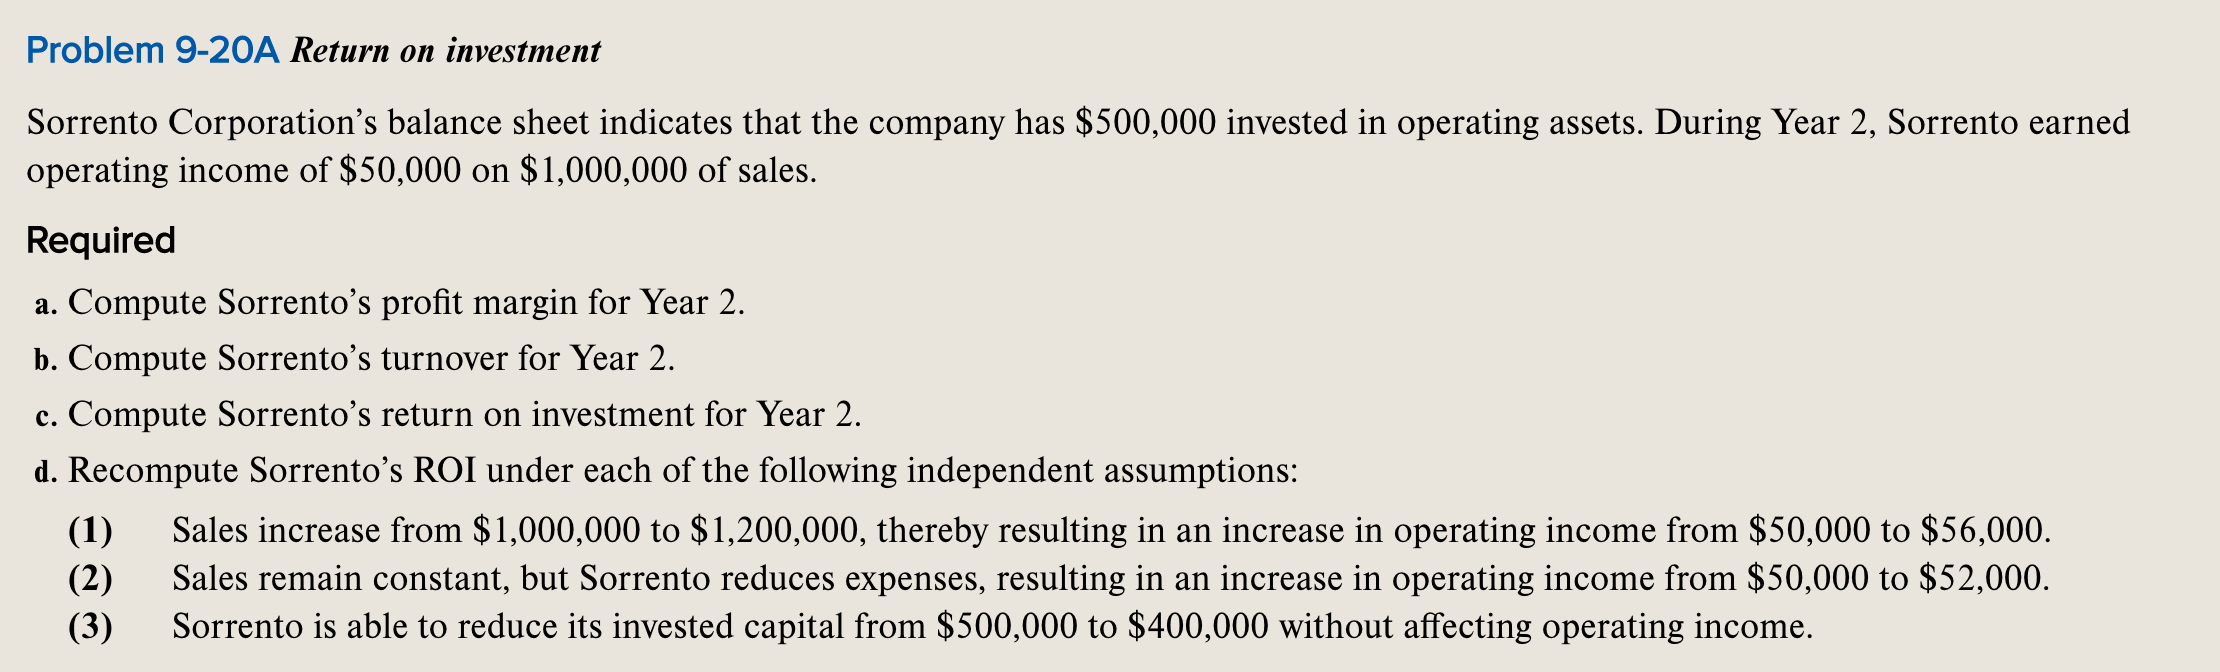 Sorrento Corporation's balance sheet indicates that the company has $500,000 invested in operating assets. During Year 2, Sorrento earned
operating income of $50,000 on $1,000,000 of sales.
Required
a. Compute Sorrento’s profit margin for Year 2.
b. Compute Sorrento's turnover for Year 2.
c. Compute Sorrento's return on investment for Year 2.
